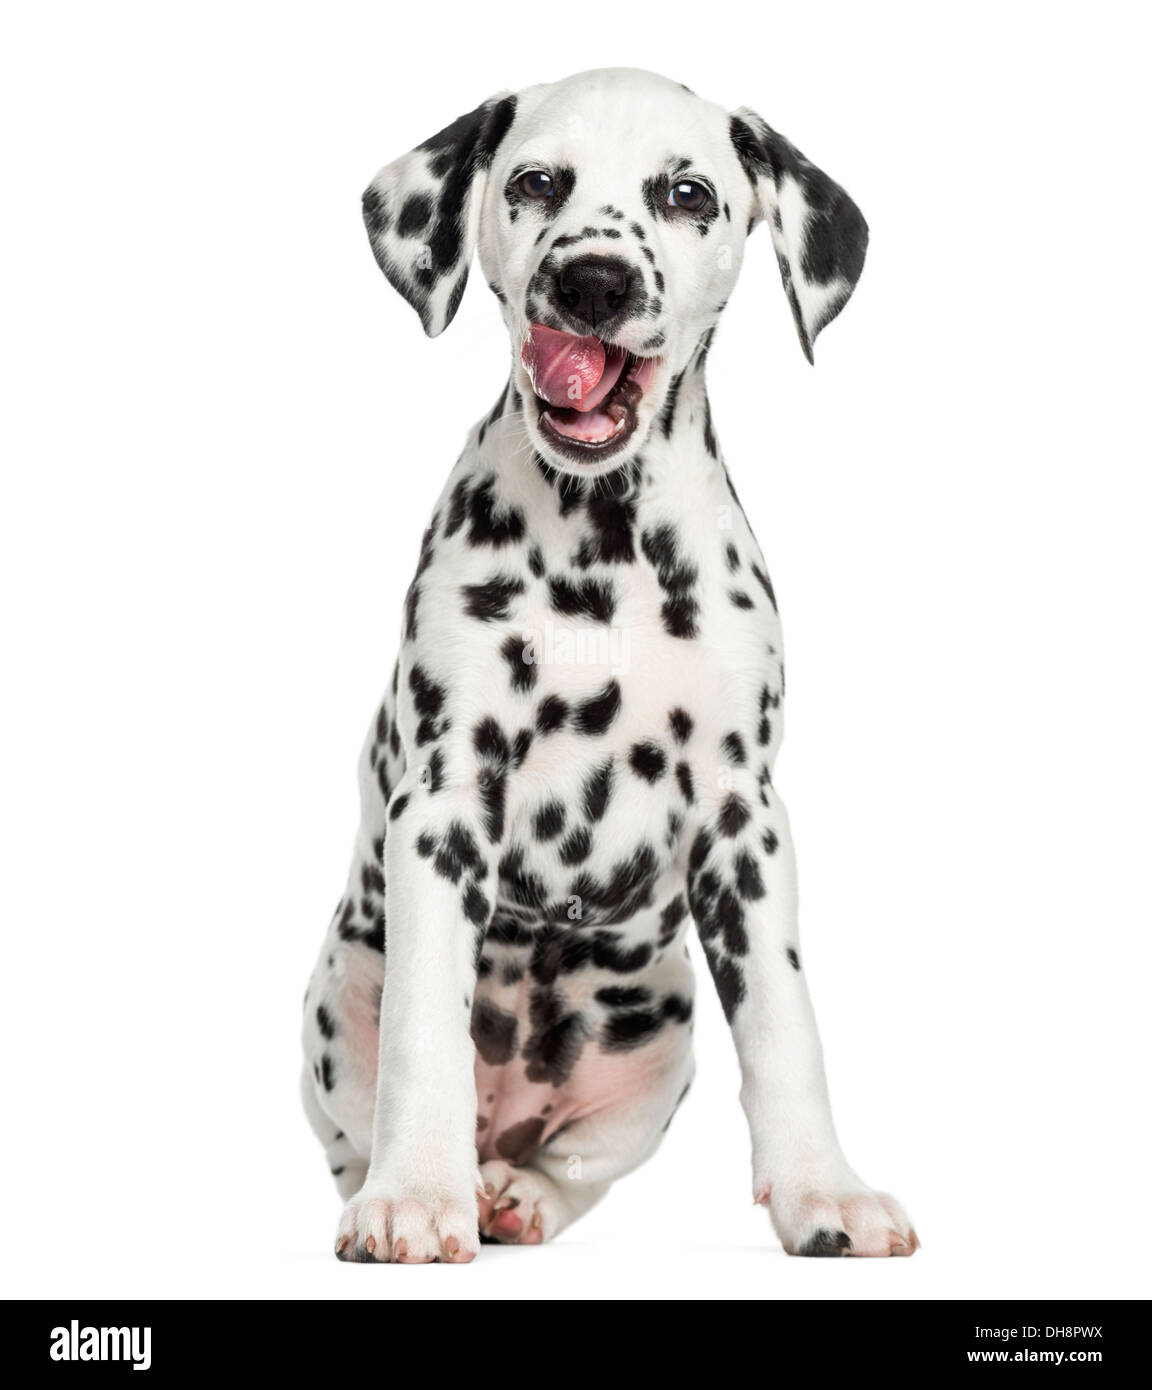 Front view of a young Dalmatian sitting, licking against white background Stock Photo